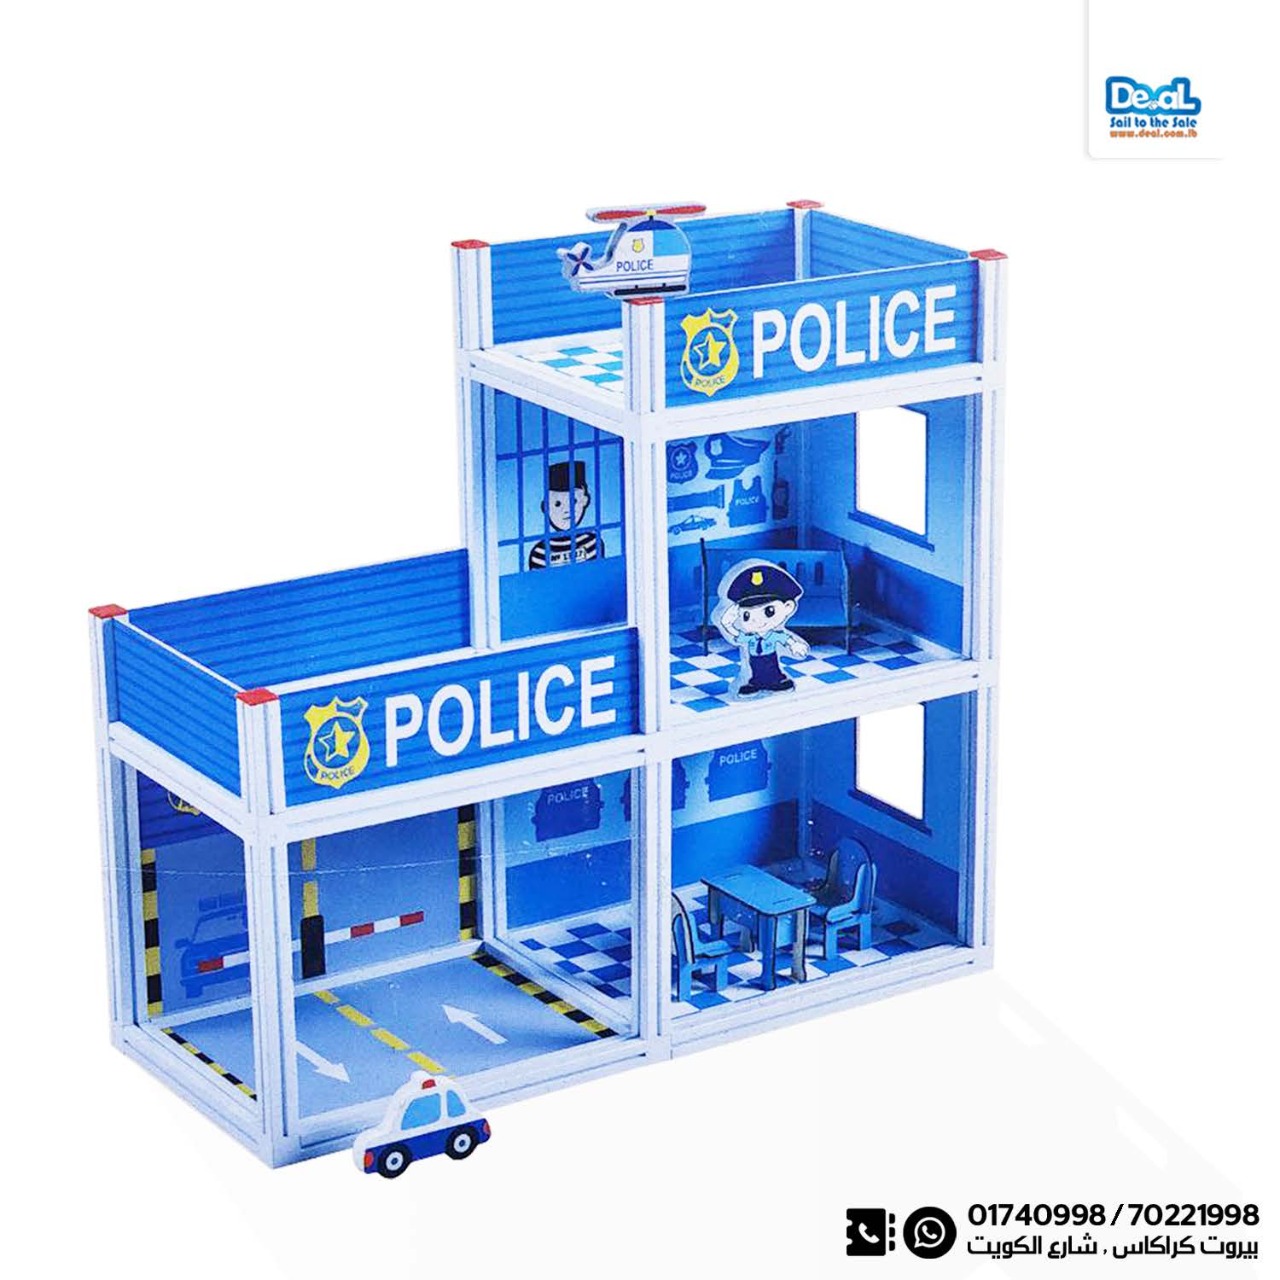 Wood & Plastic Police Station Toy